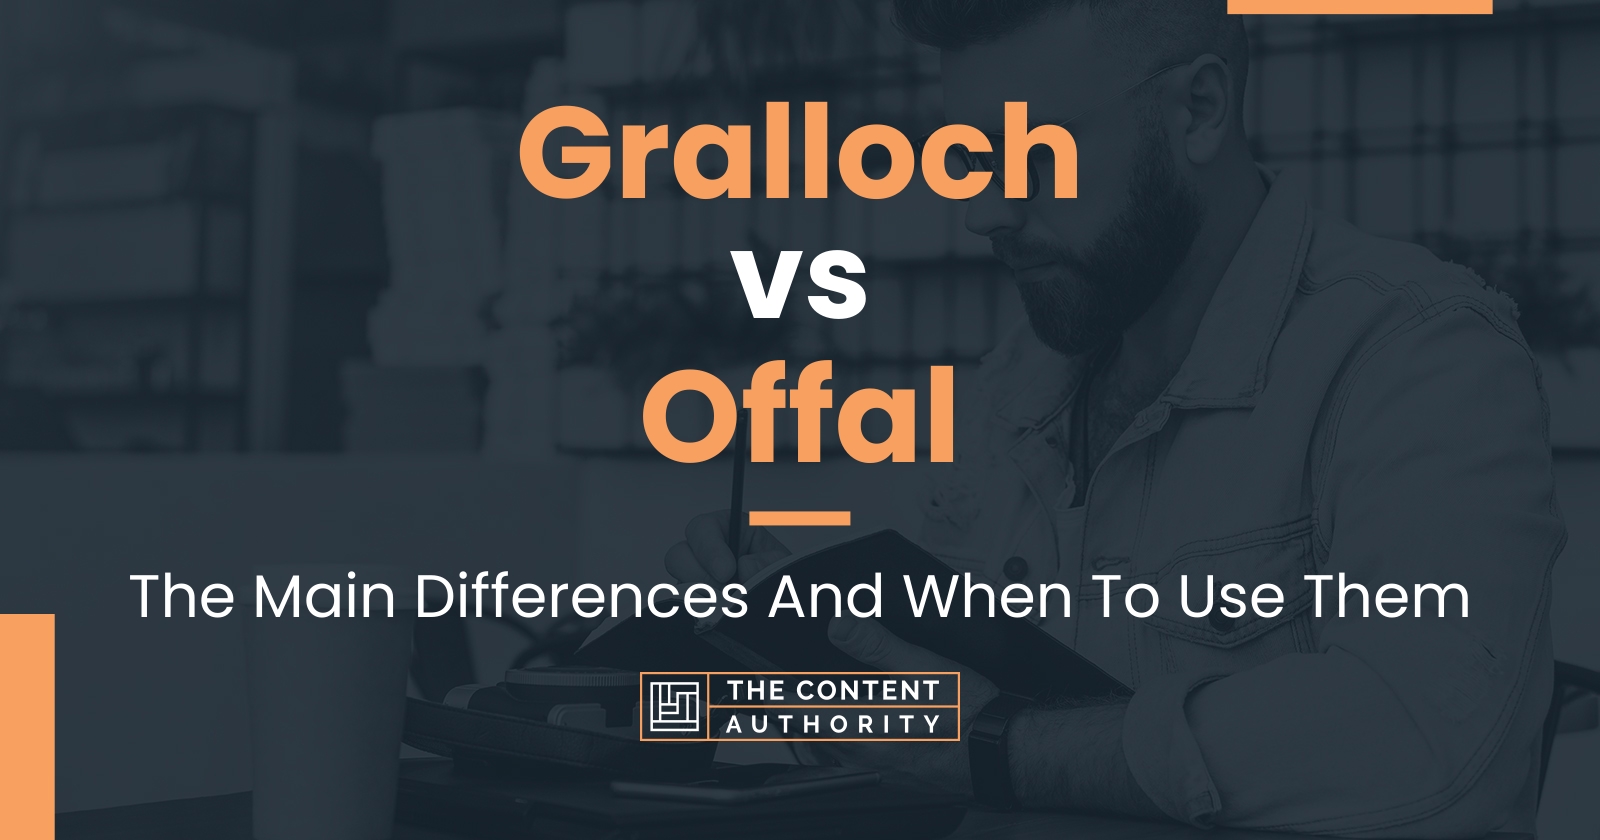 Gralloch vs Offal: The Main Differences And When To Use Them